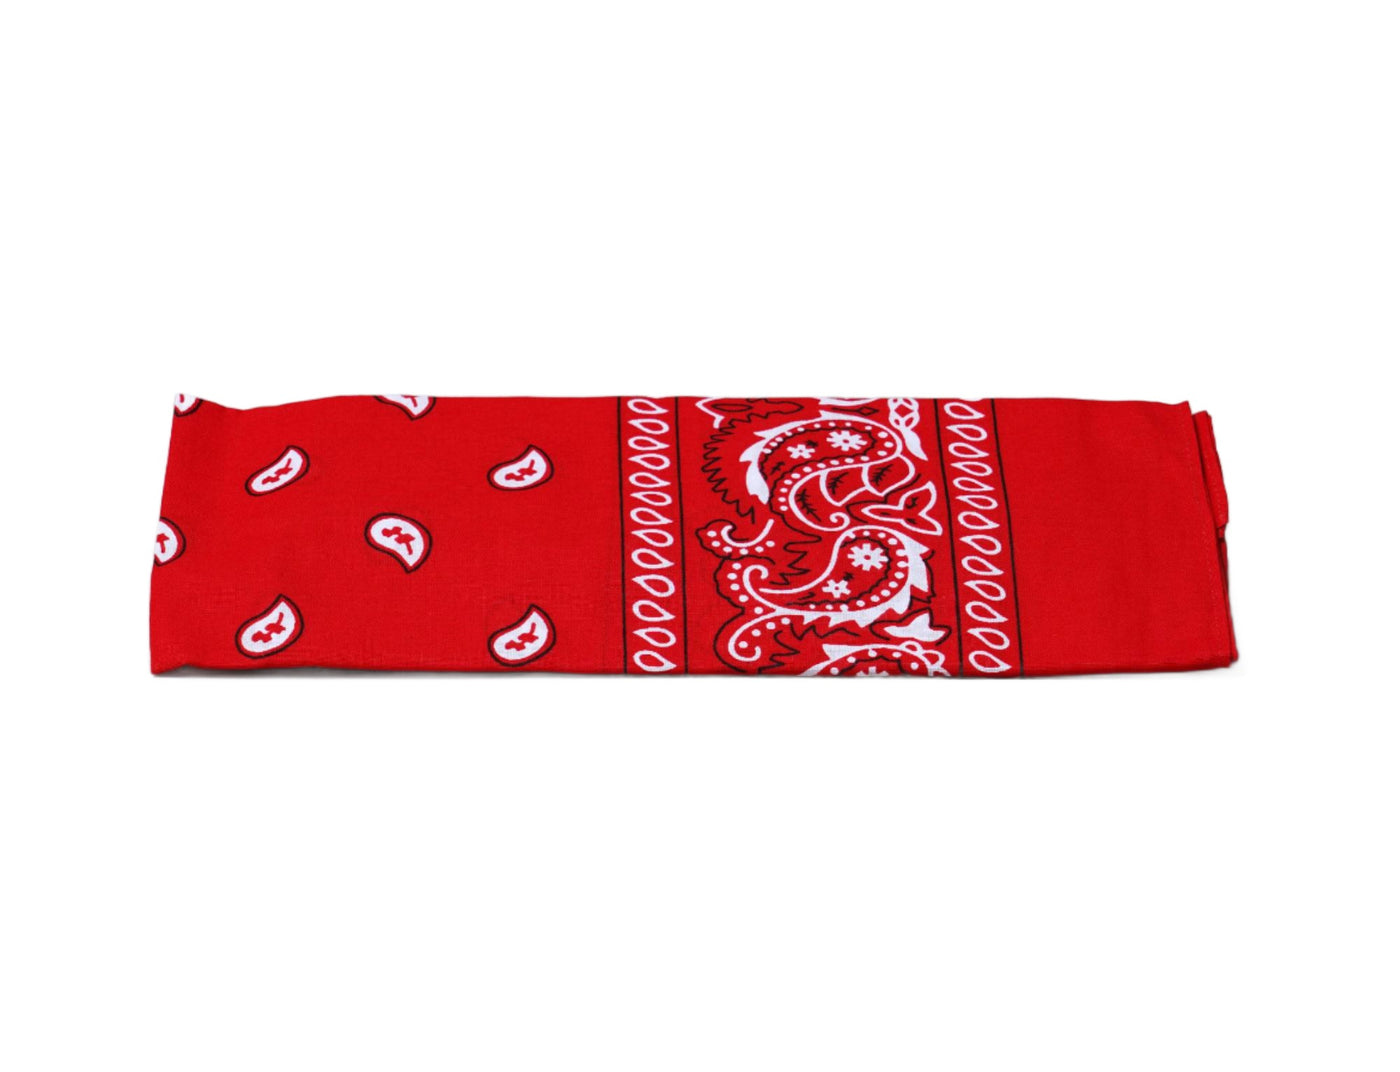 Accessories Scarf Bandana Red/White/Black No Brand Accessorie / Red / One Size